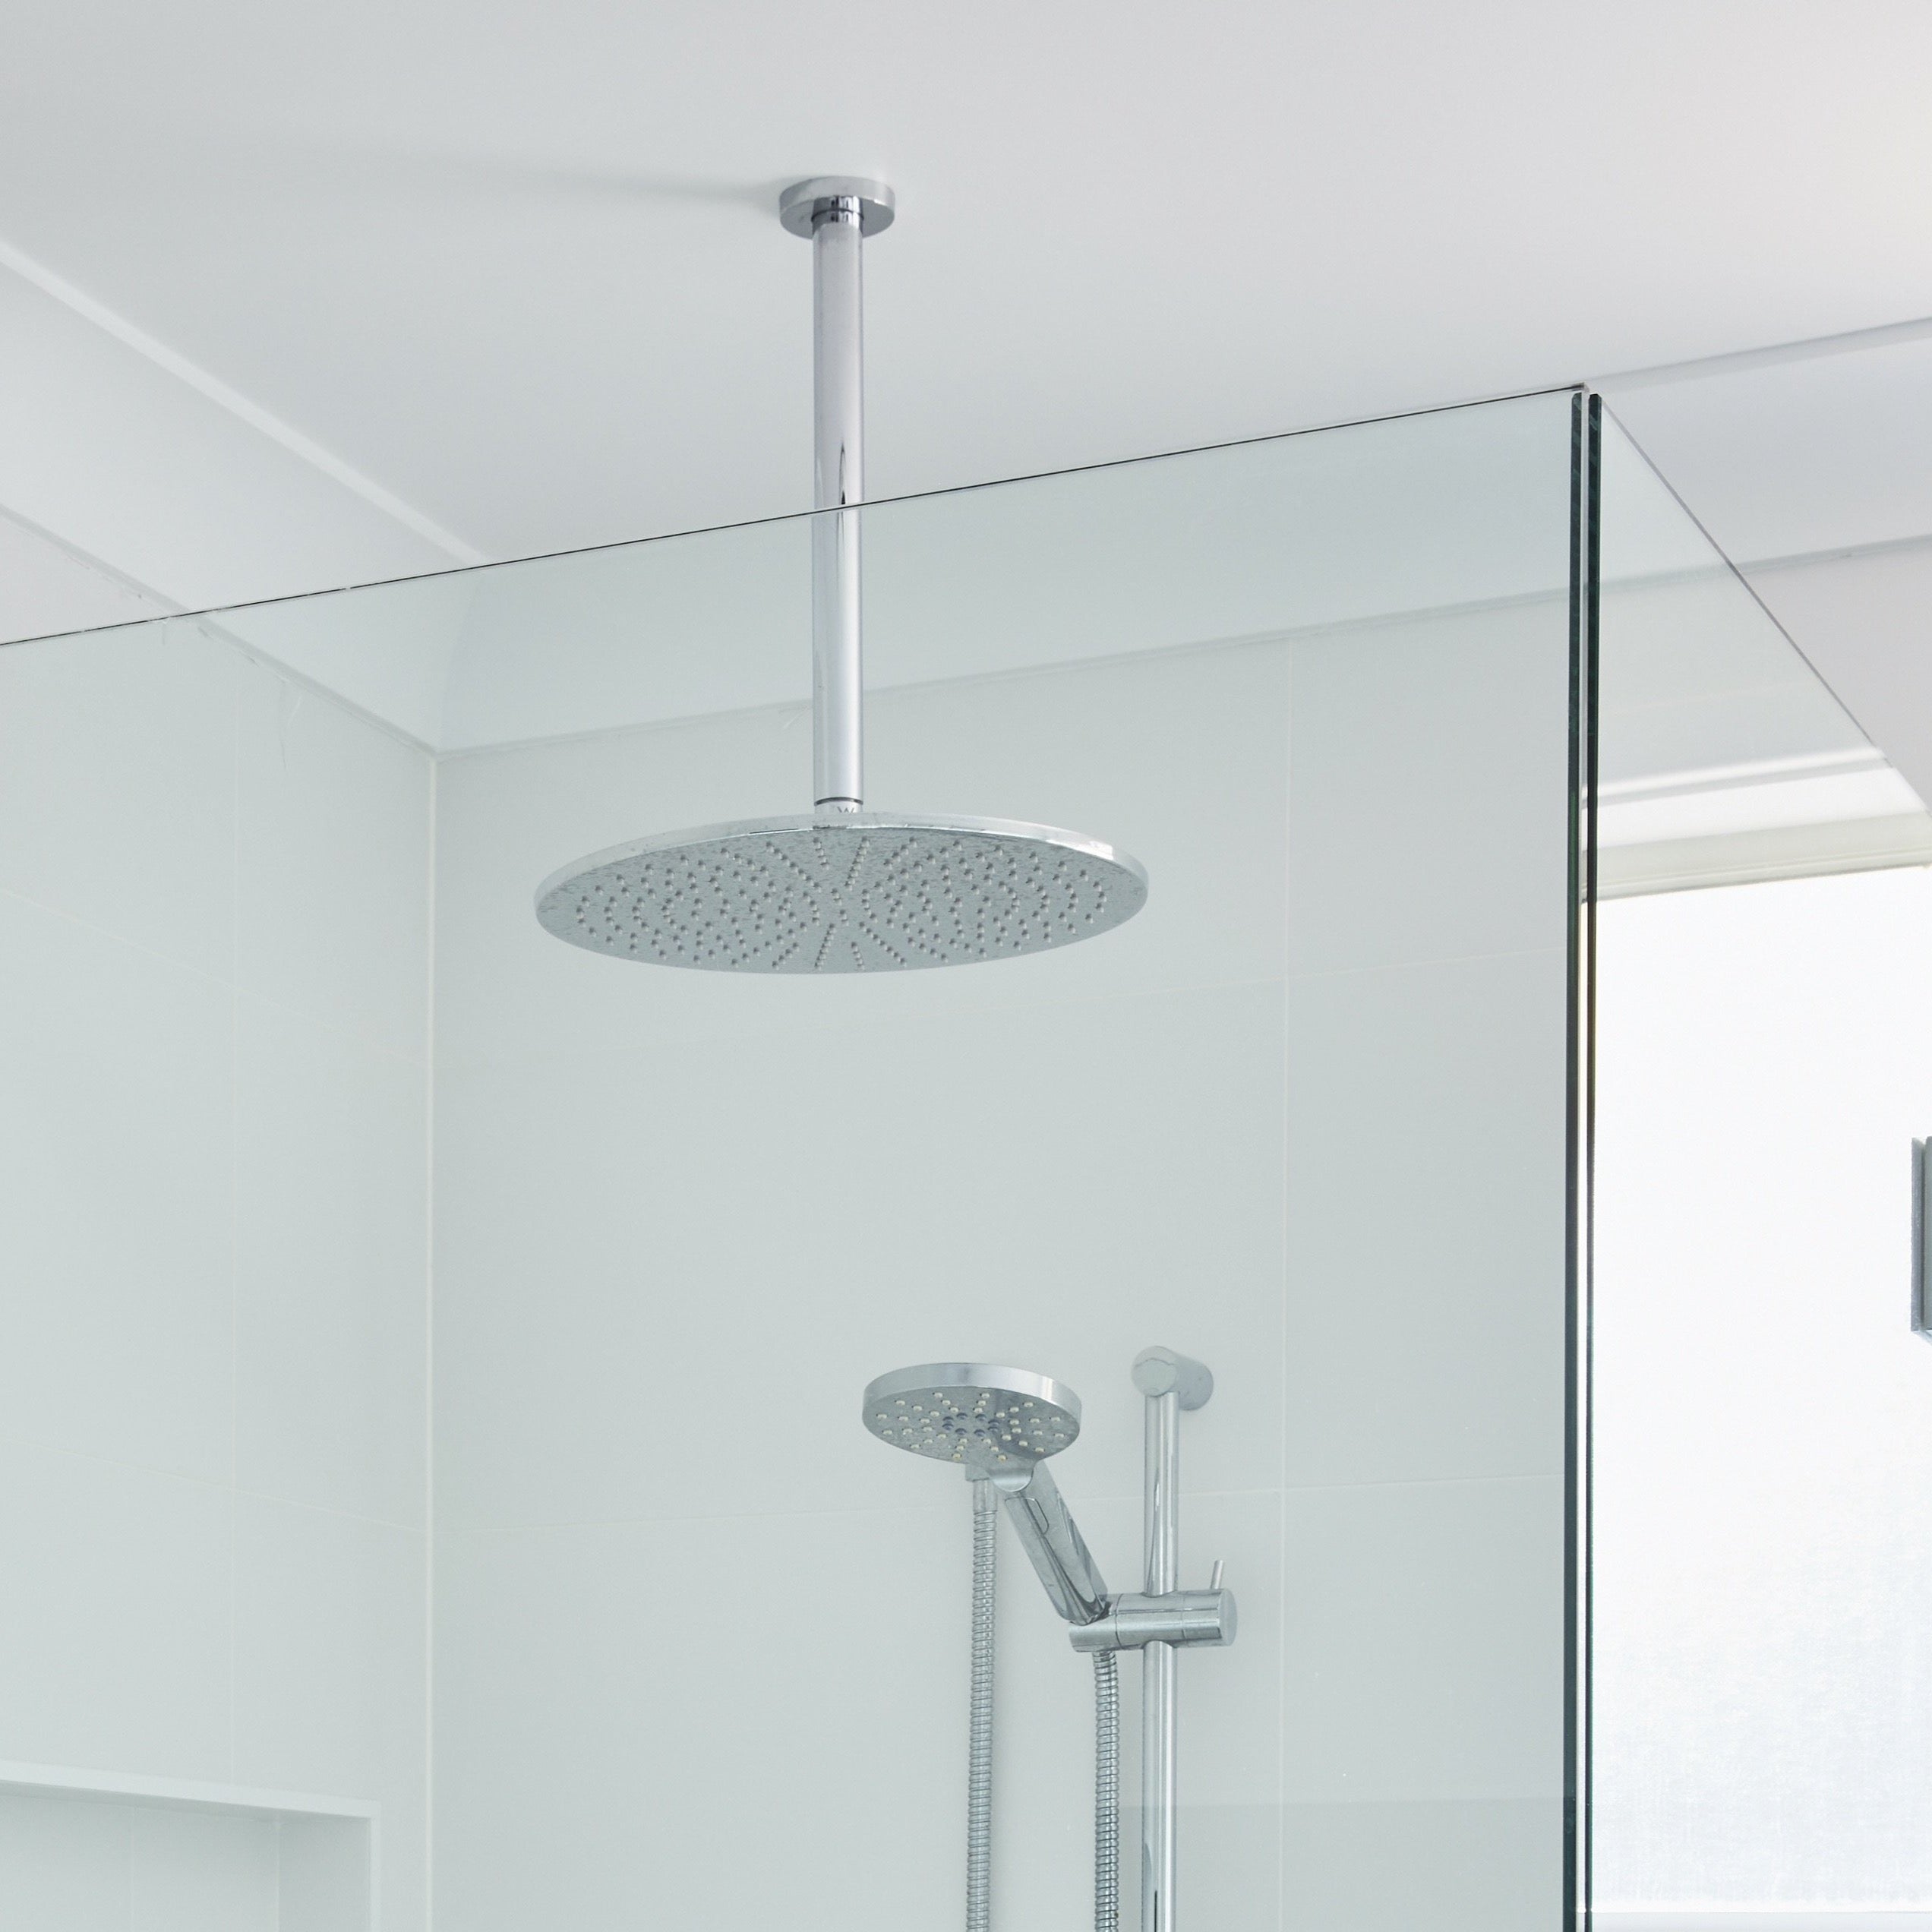 Daintree Ceiling Mounted Shower Arm Round 200mm in Brushed Nickel